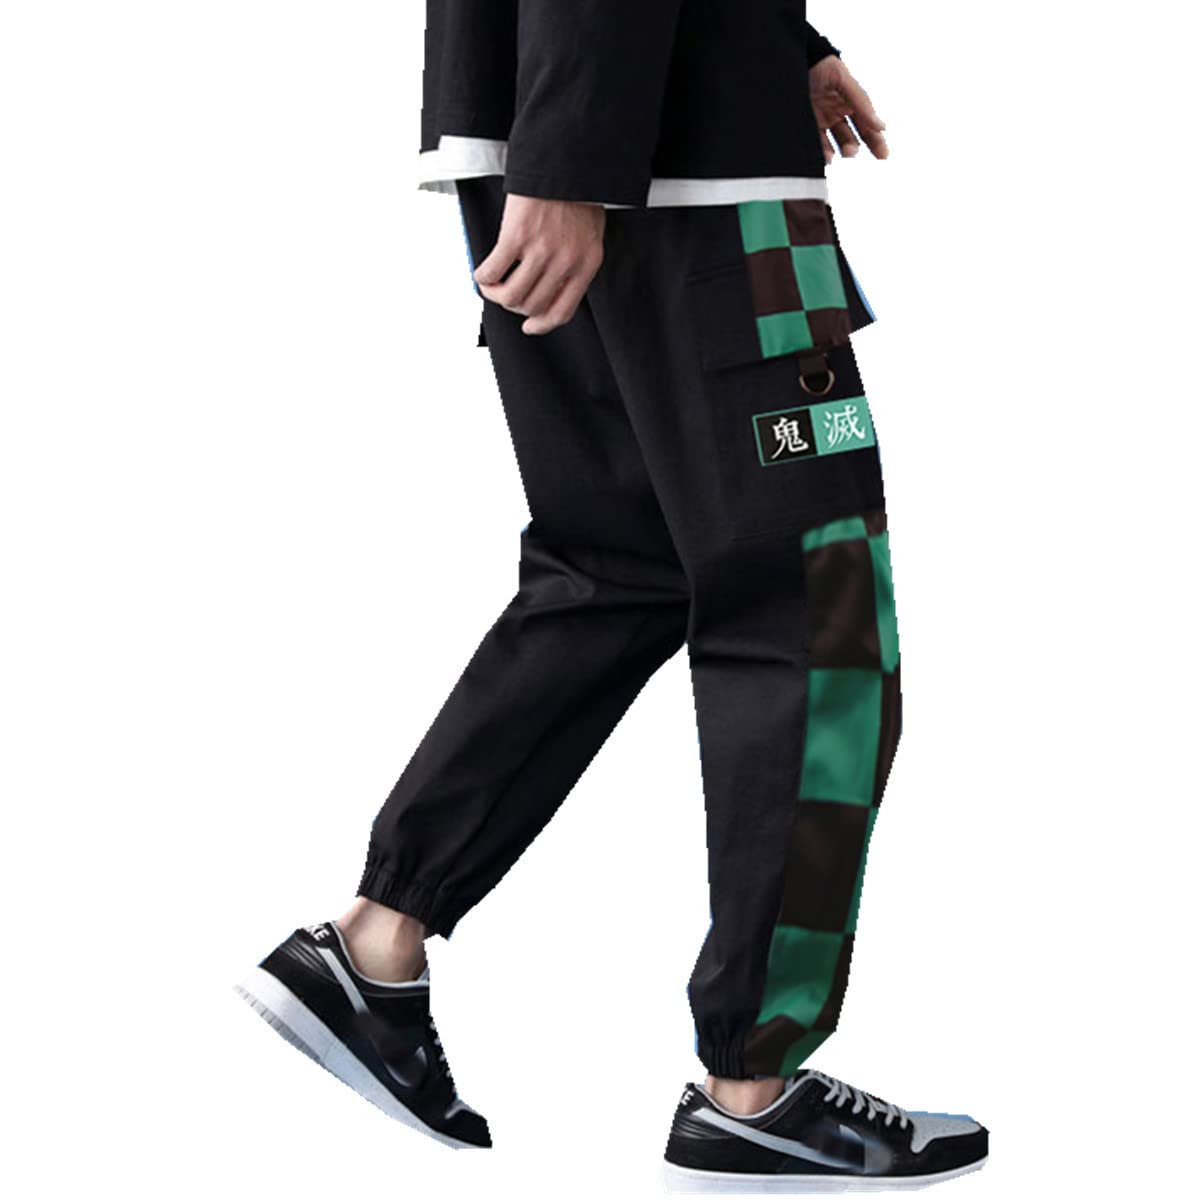 Buddy Esquire Anime Pants | Buddy Esquire